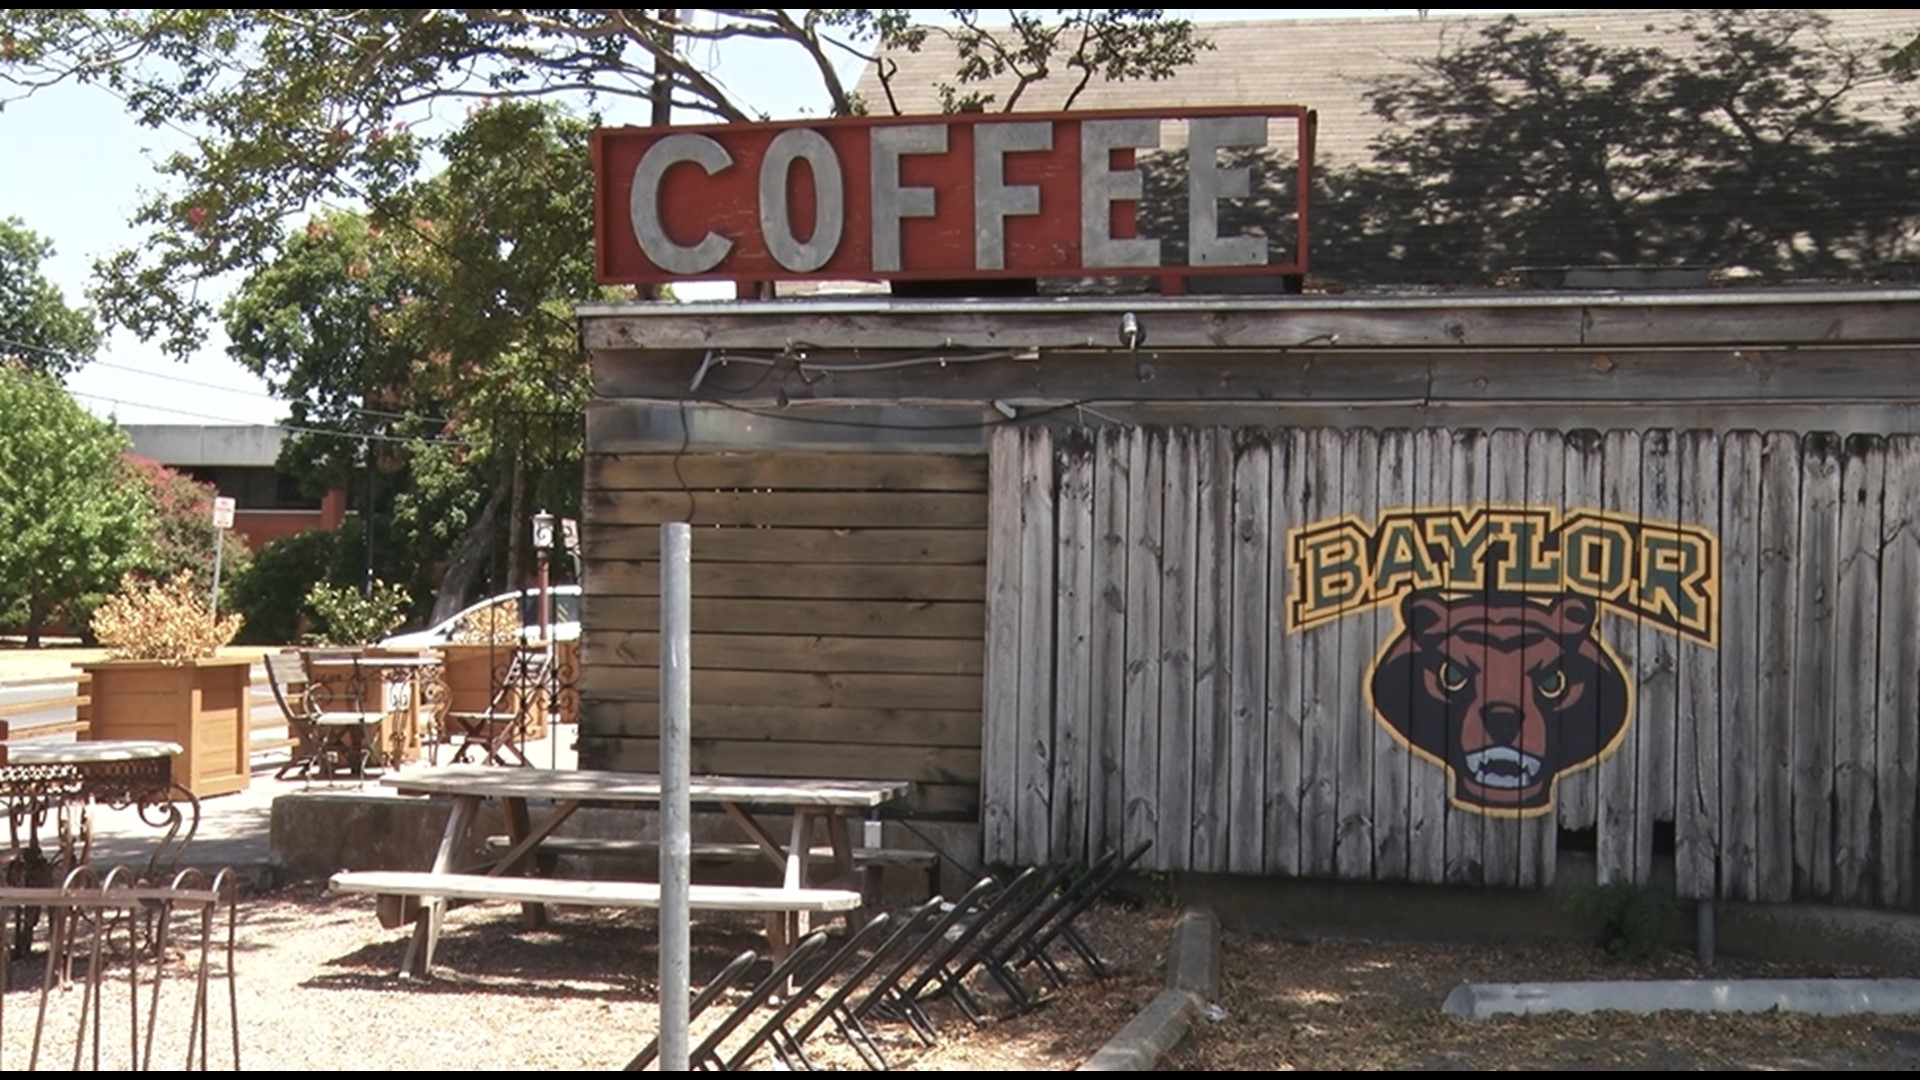 One Waco coffee shop is steps away from Baylor's campus and makes it that much easier for students to get their daily dose of caffeine.